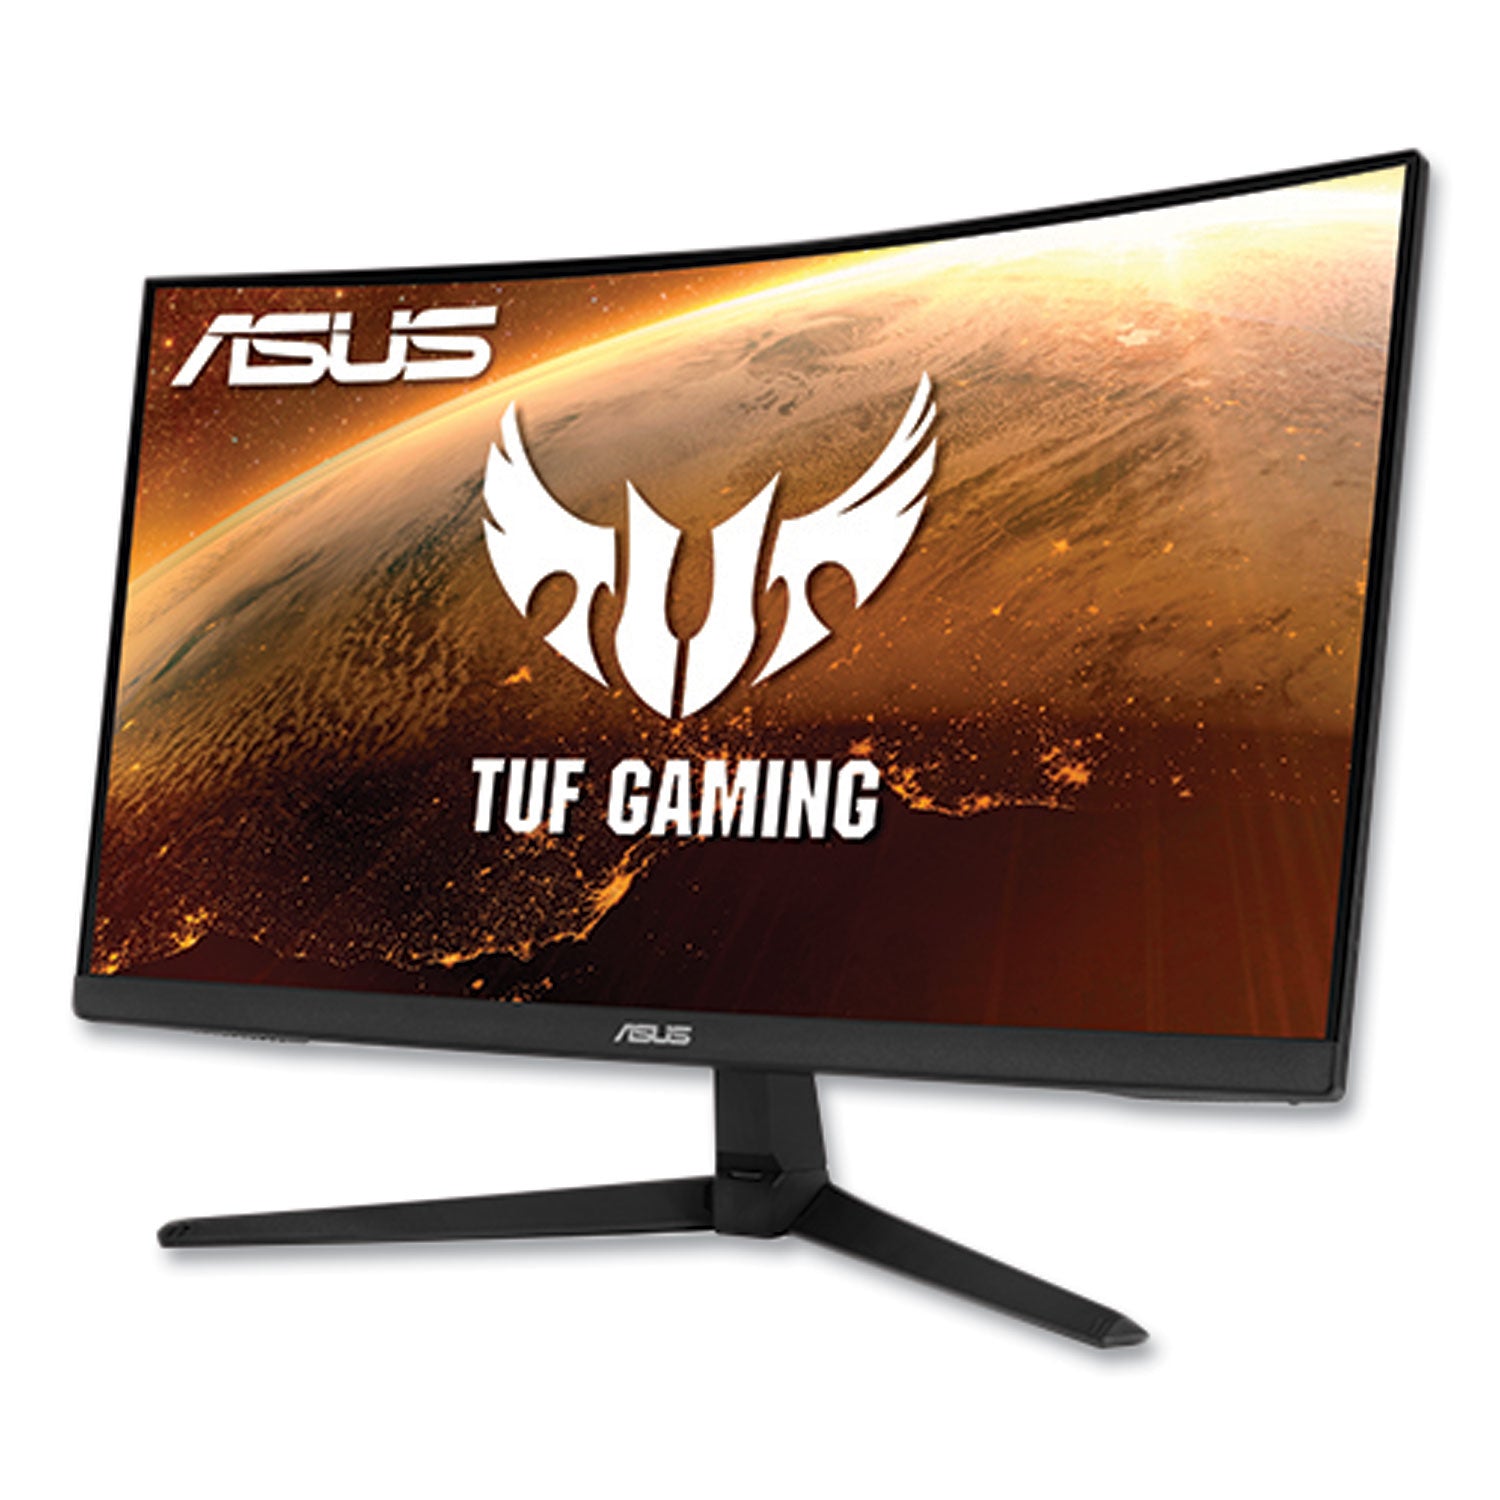 vg24vq1by-tuf-gaming-led-monitor-238-widescreen-va-panel-1920-pixels-x-1080-pixels_asuvg24vq1by - 3